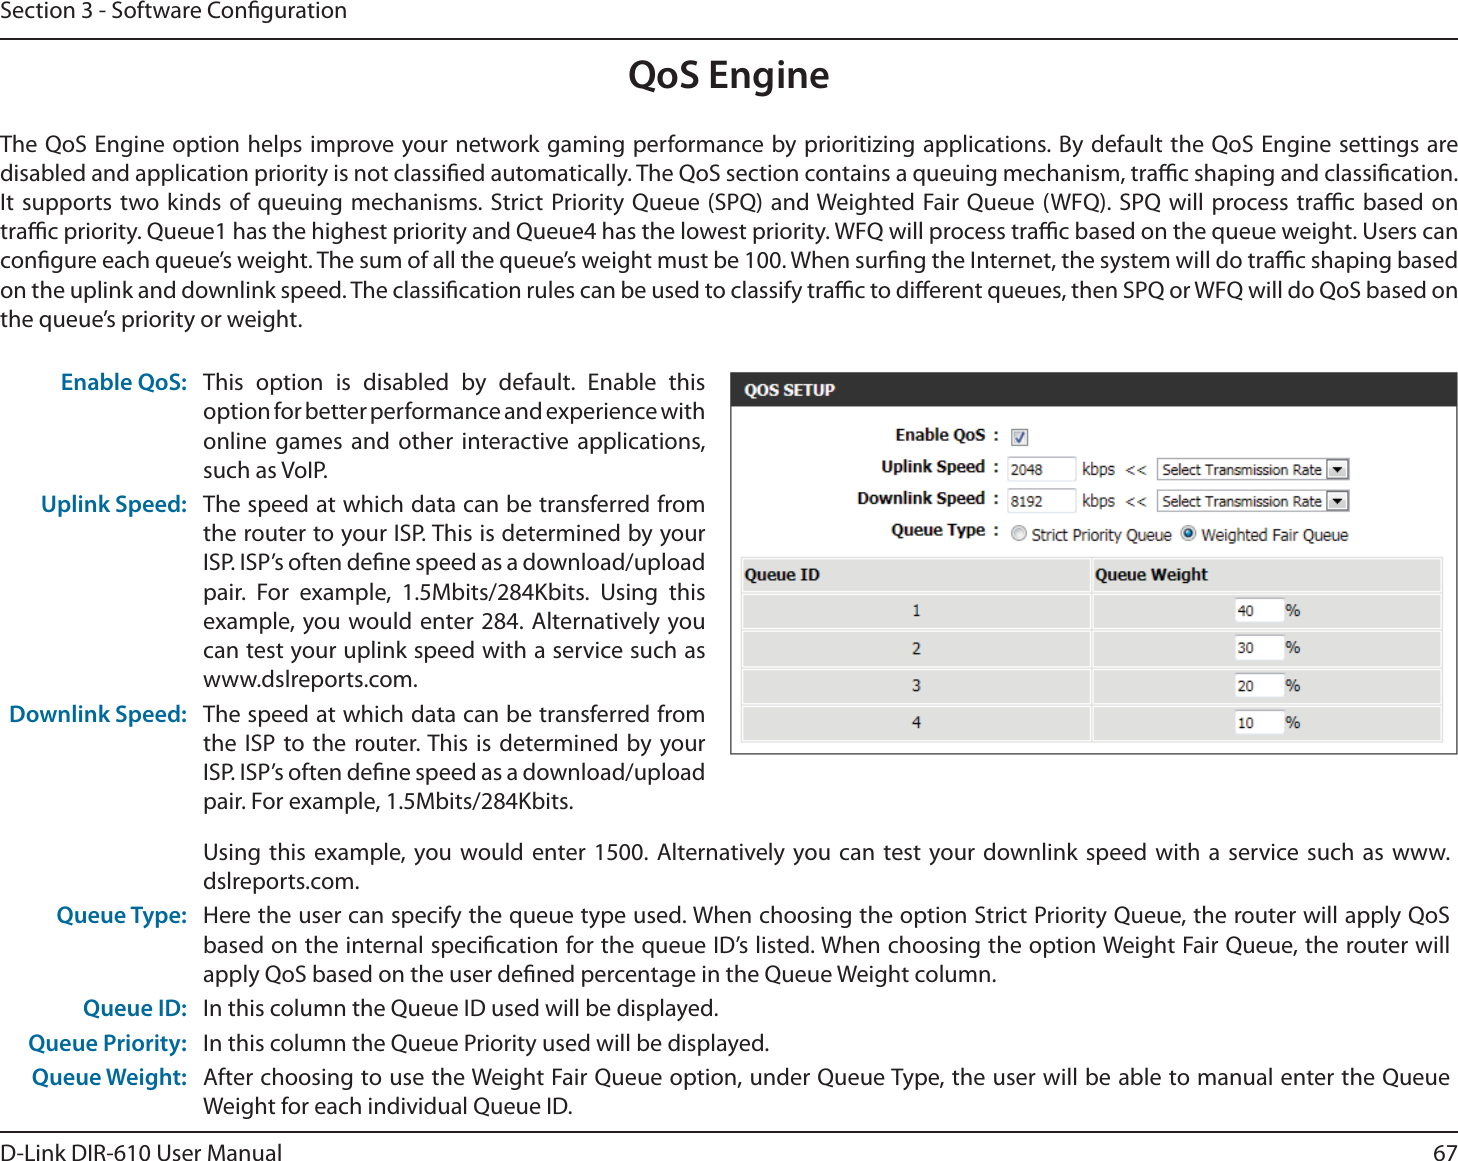 67D-Link DIR-610 User ManualSection 3 - Software CongurationQoS EngineThe QoS Engine option helps improve your network gaming performance by prioritizing applications. By default the QoS Engine settings are disabled and application priority is not classied automatically. The QoS section contains a queuing mechanism, trac shaping and classication. It supports two kinds of queuing mechanisms. Strict Priority Queue (SPQ) and Weighted Fair Queue (WFQ). SPQ will process trac based on trac priority. Queue1 has the highest priority and Queue4 has the lowest priority. WFQ will process trac based on the queue weight. Users can congure each queue’s weight. The sum of all the queue’s weight must be 100. When surng the Internet, the system will do trac shaping based on the uplink and downlink speed. The classication rules can be used to classify trac to dierent queues, then SPQ or WFQ will do QoS based on the queue’s priority or weight.Enable QoS: This option is disabled by default. Enable this option for better performance and experience with online games and other interactive applications, such as VoIP.Uplink Speed: The speed at which data can be transferred from the router to your ISP. This is determined by your ISP. ISP’s often dene speed as a download/upload pair. For example, 1.5Mbits/284Kbits. Using this example, you would enter 284. Alternatively you can test your uplink speed with a service such as www.dslreports.com.Downlink Speed: The speed at which data can be transferred from the ISP to the router. This is determined by your ISP. ISP’s often dene speed as a download/upload pair. For example, 1.5Mbits/284Kbits. Using this example, you would enter 1500. Alternatively you can test your downlink speed with a service such as www.dslreports.com.Queue Type: Here the user can specify the queue type used. When choosing the option Strict Priority Queue, the router will apply QoS based on the internal specication for the queue ID’s listed. When choosing the option Weight Fair Queue, the router will apply QoS based on the user dened percentage in the Queue Weight column.Queue ID: In this column the Queue ID used will be displayed.Queue Priority: In this column the Queue Priority used will be displayed.Queue Weight: After choosing to use the Weight Fair Queue option, under Queue Type, the user will be able to manual enter the Queue Weight for each individual Queue ID.